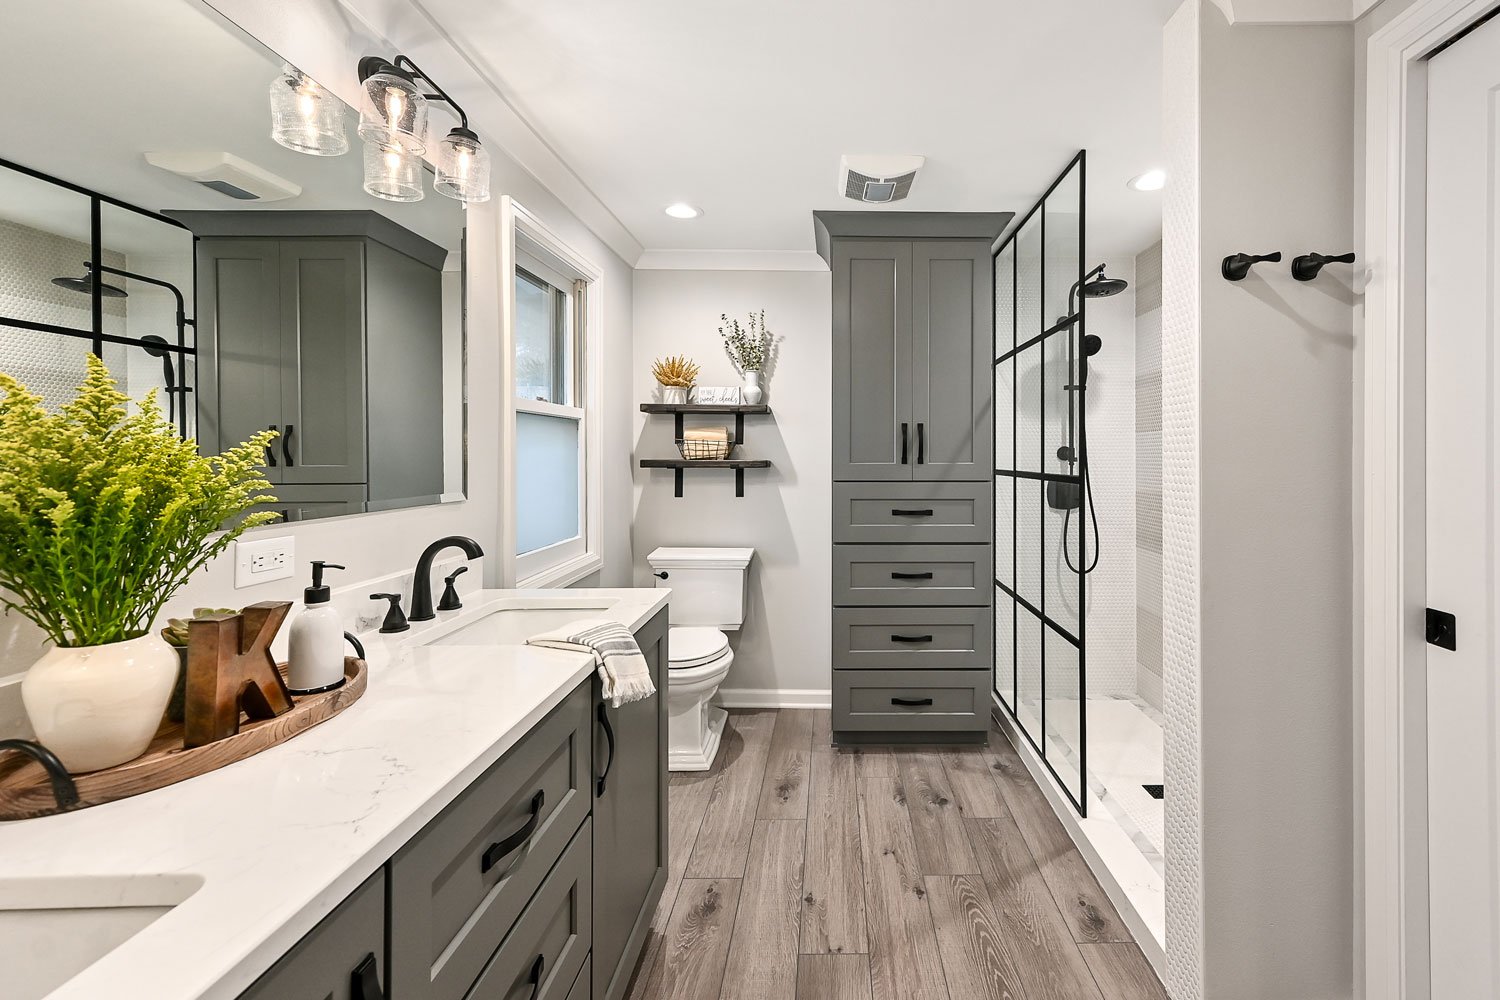 Bathroom Repairs and Upgrades: Transforming Your Space